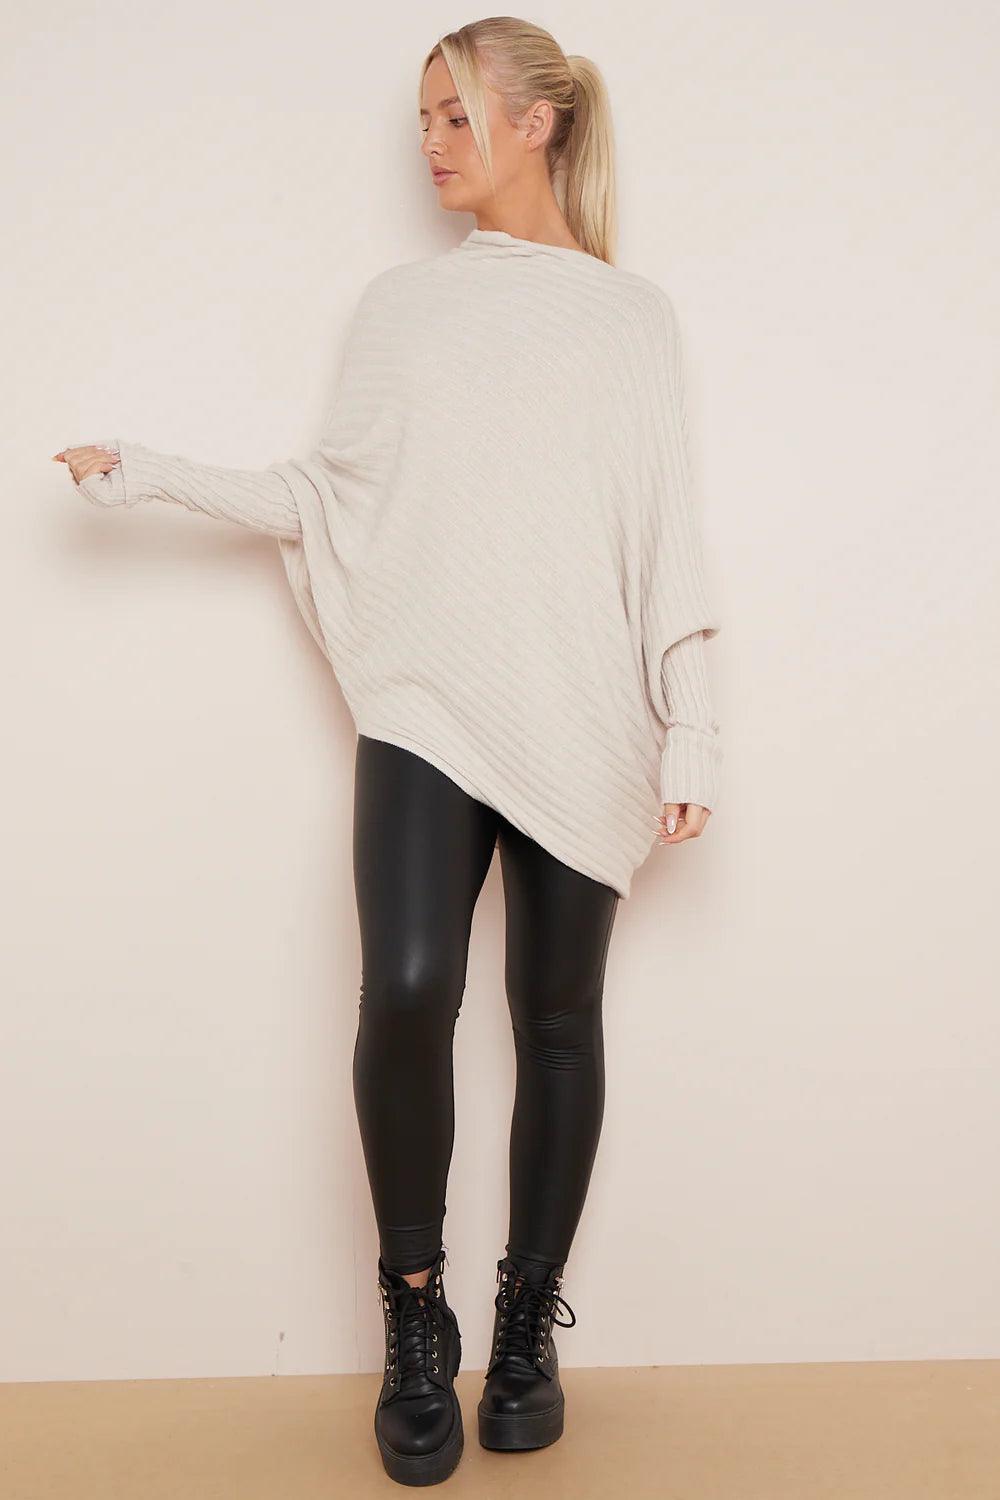 Poppy Batwing Pattern Stylish and Comfortable Oversized Jumper UK Beige Color Relaxed Look